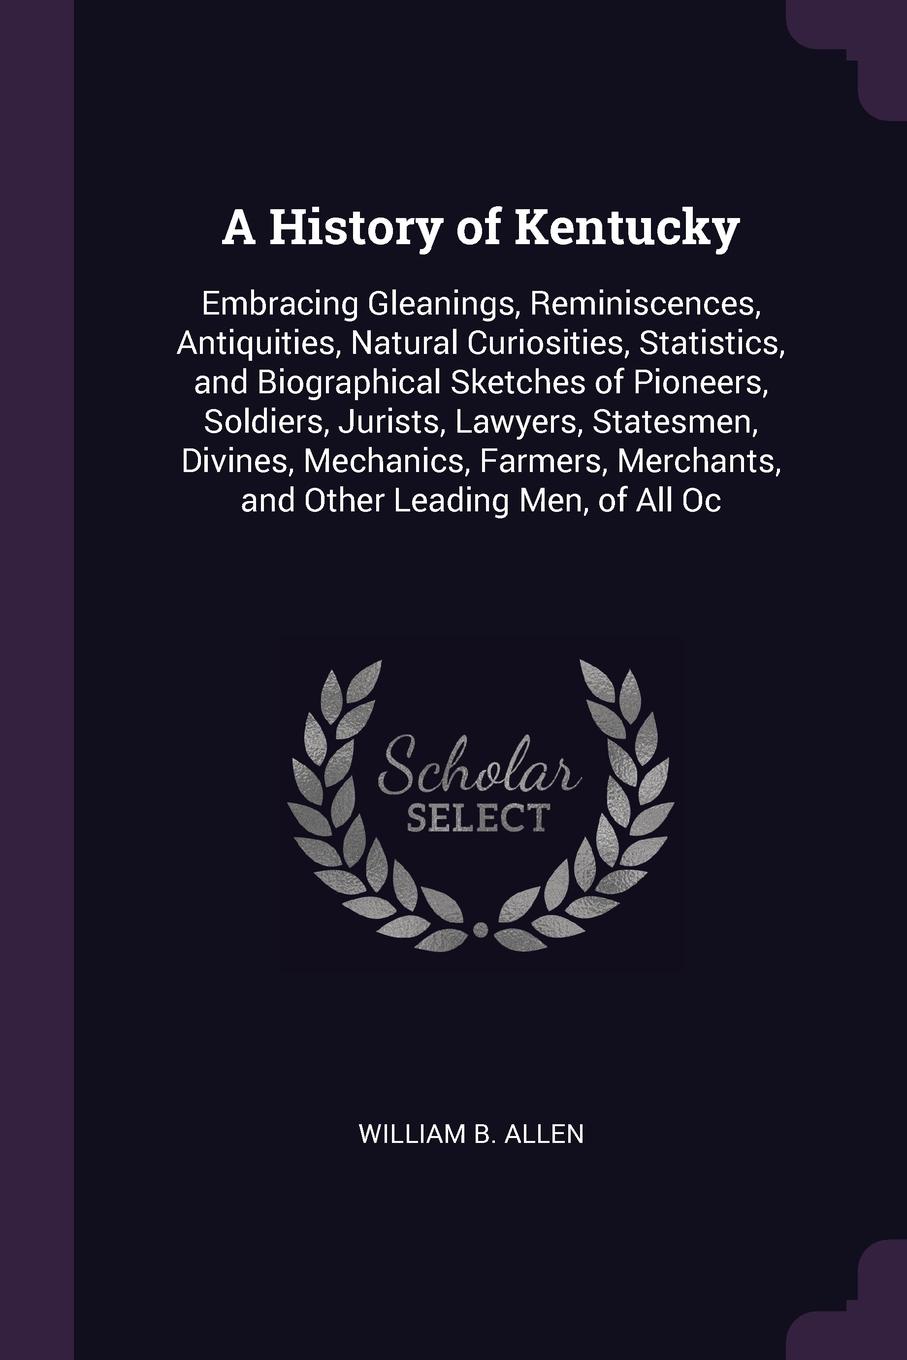 A History of Kentucky. Embracing Gleanings, Reminiscences, Antiquities, Natural Curiosities, Statistics, and Biographical Sketches of Pioneers, Soldiers, Jurists, Lawyers, Statesmen, Divines, Mechanics, Farmers, Merchants, and Other Leading Men, o...